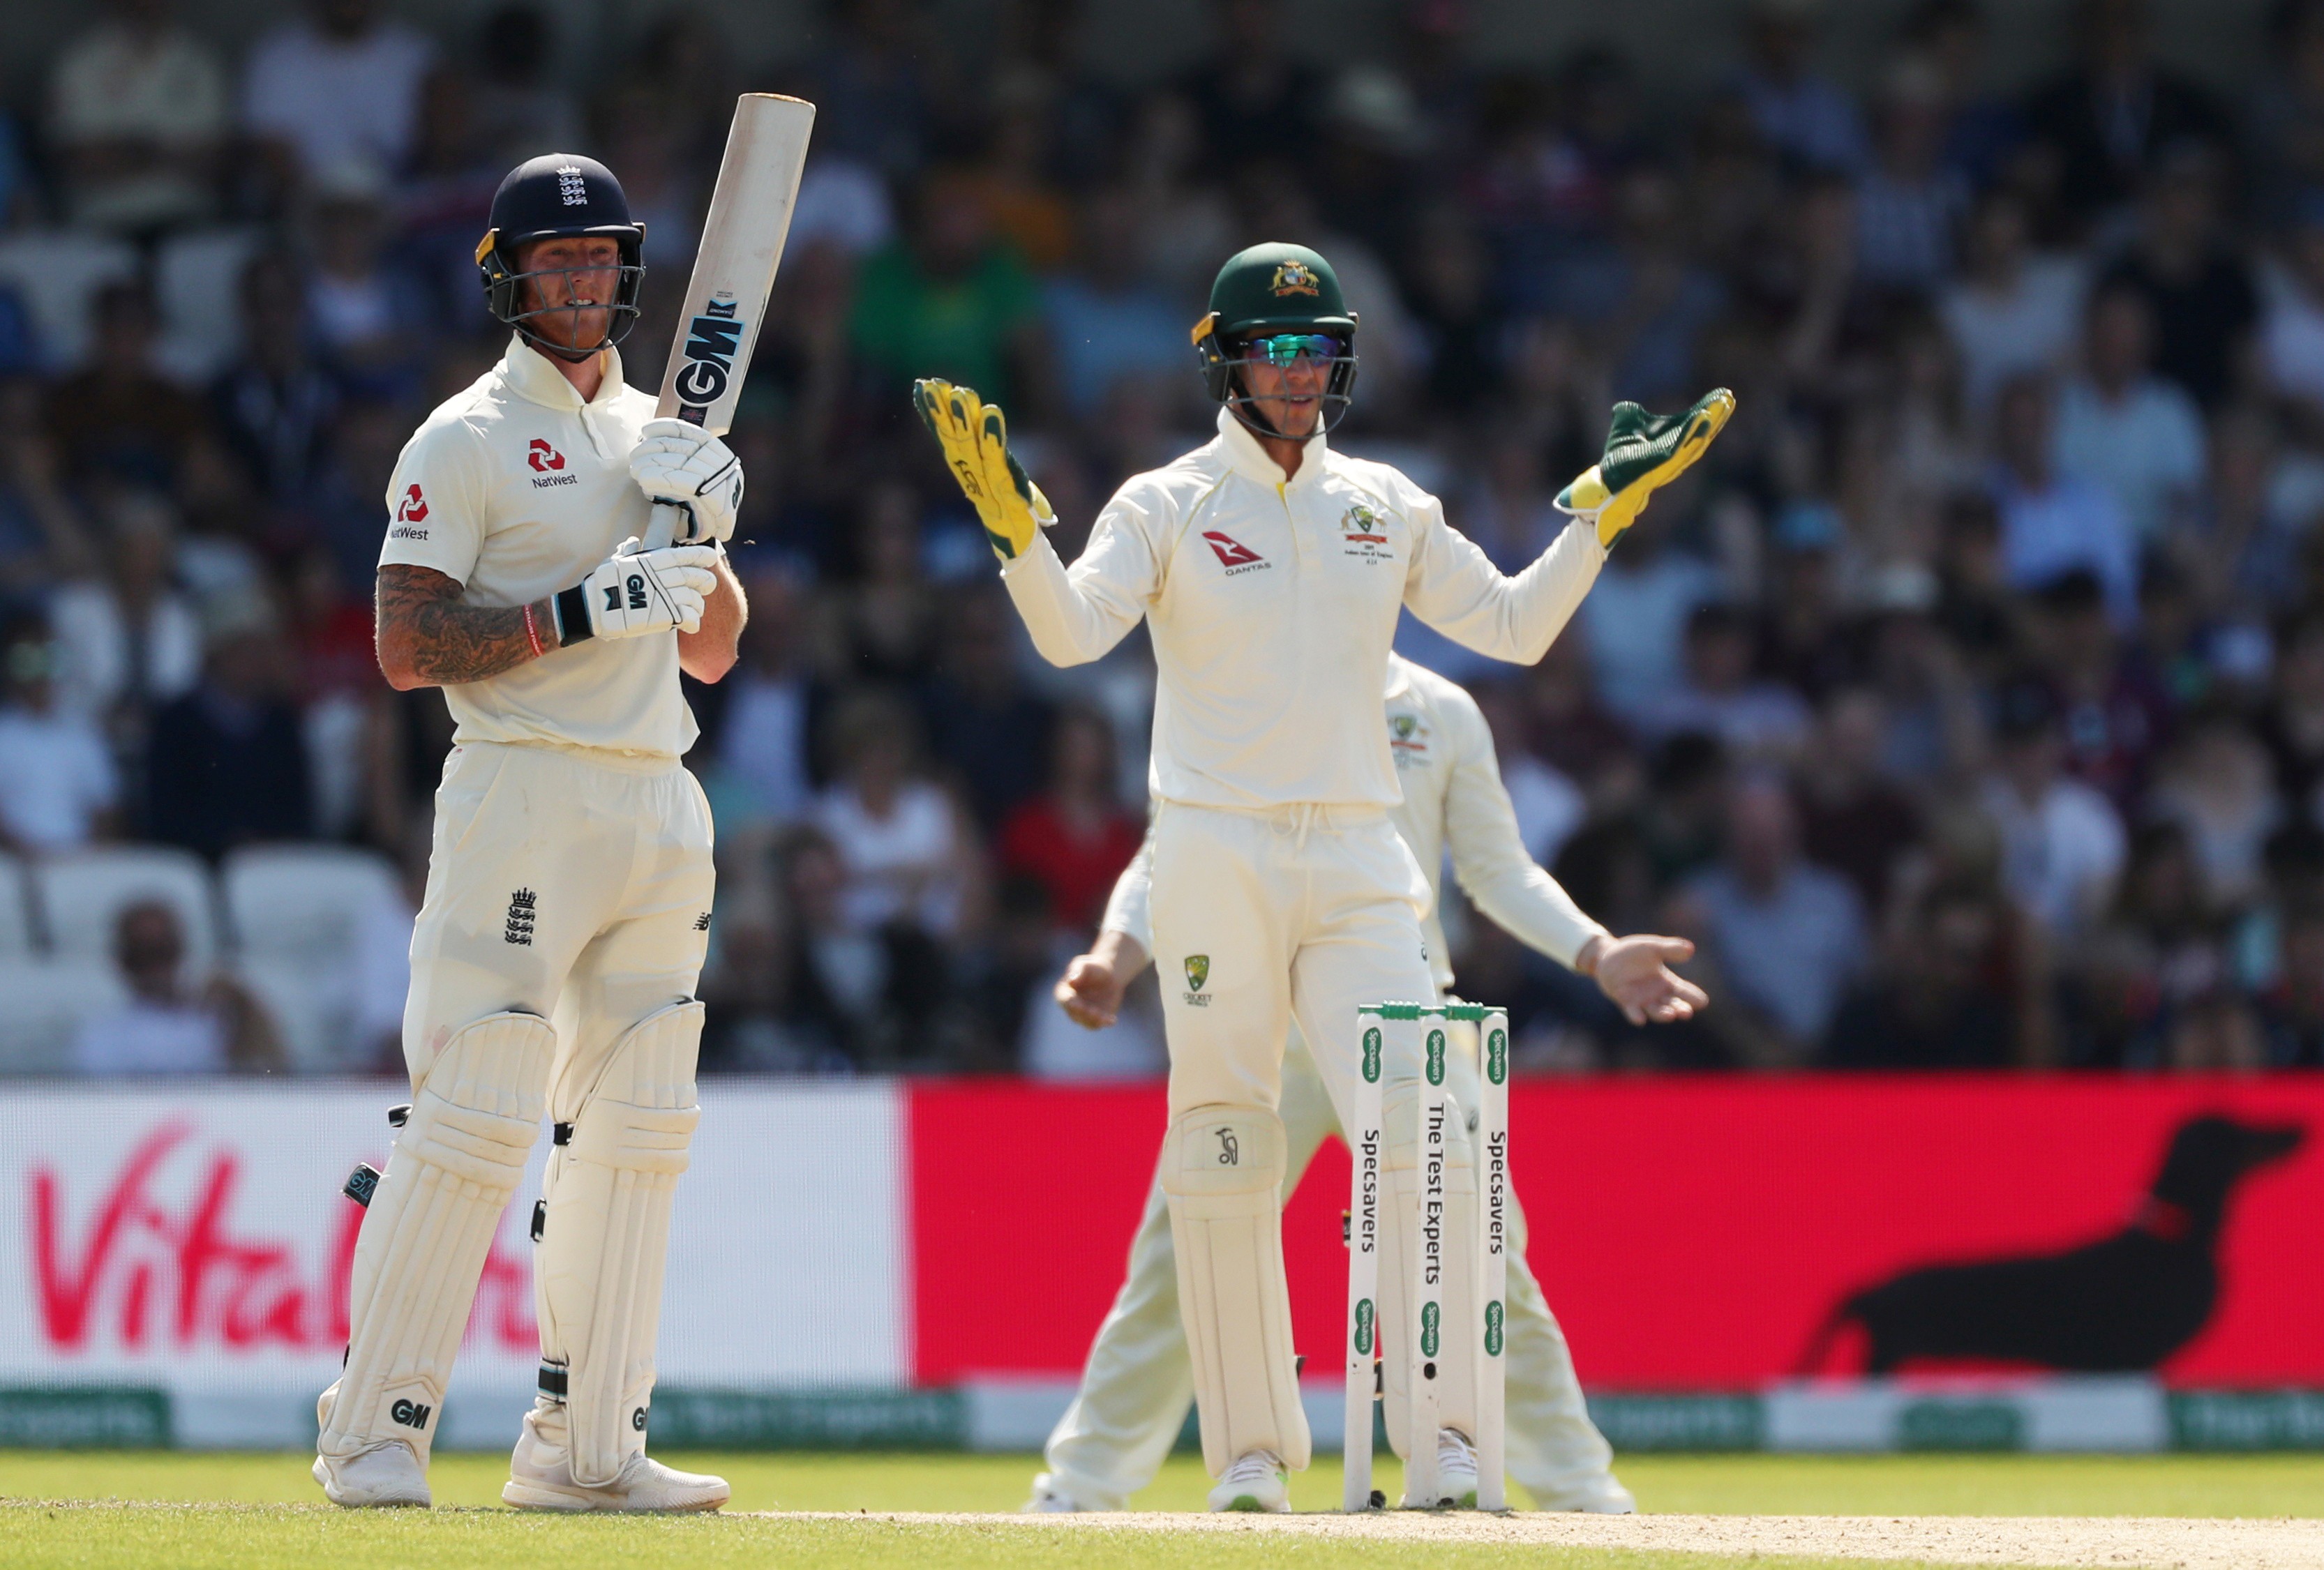 Australia captain Tim Paine has admitted that his side made too many mistakes in the final hour of the third test at Headingley. Photo: Reuters